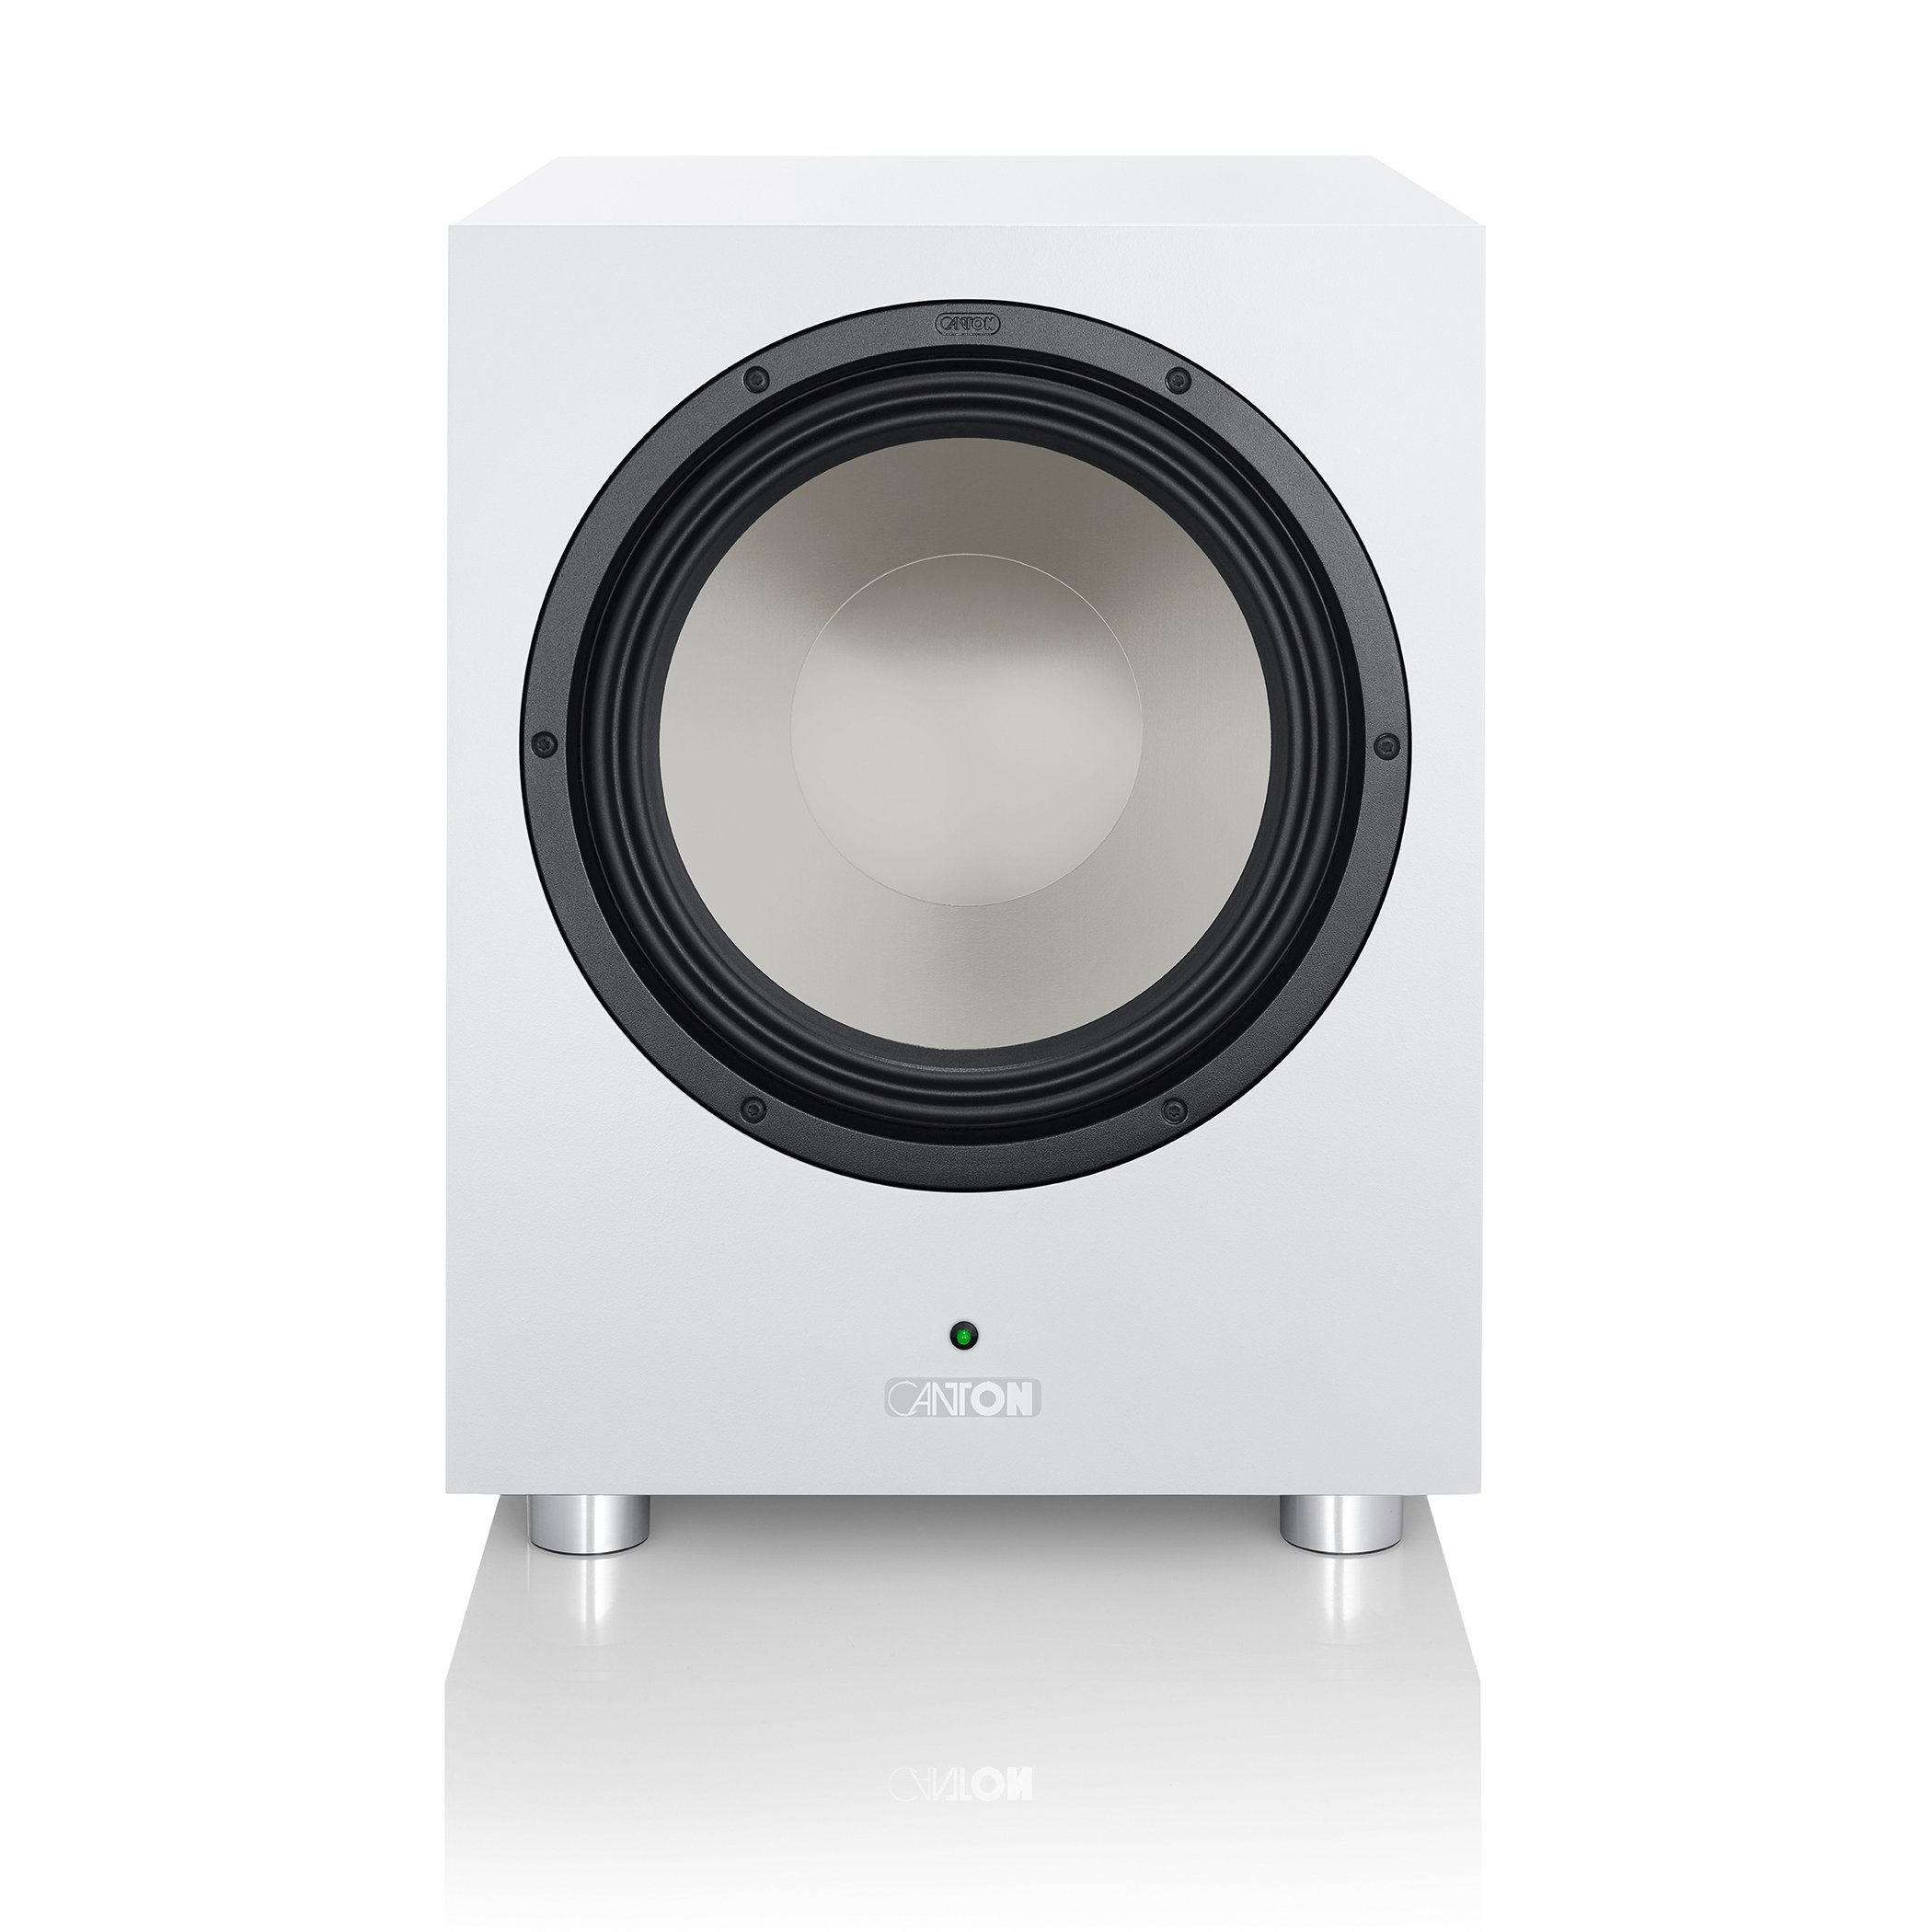 CANTON Power Sub Subwoofer weiss 12